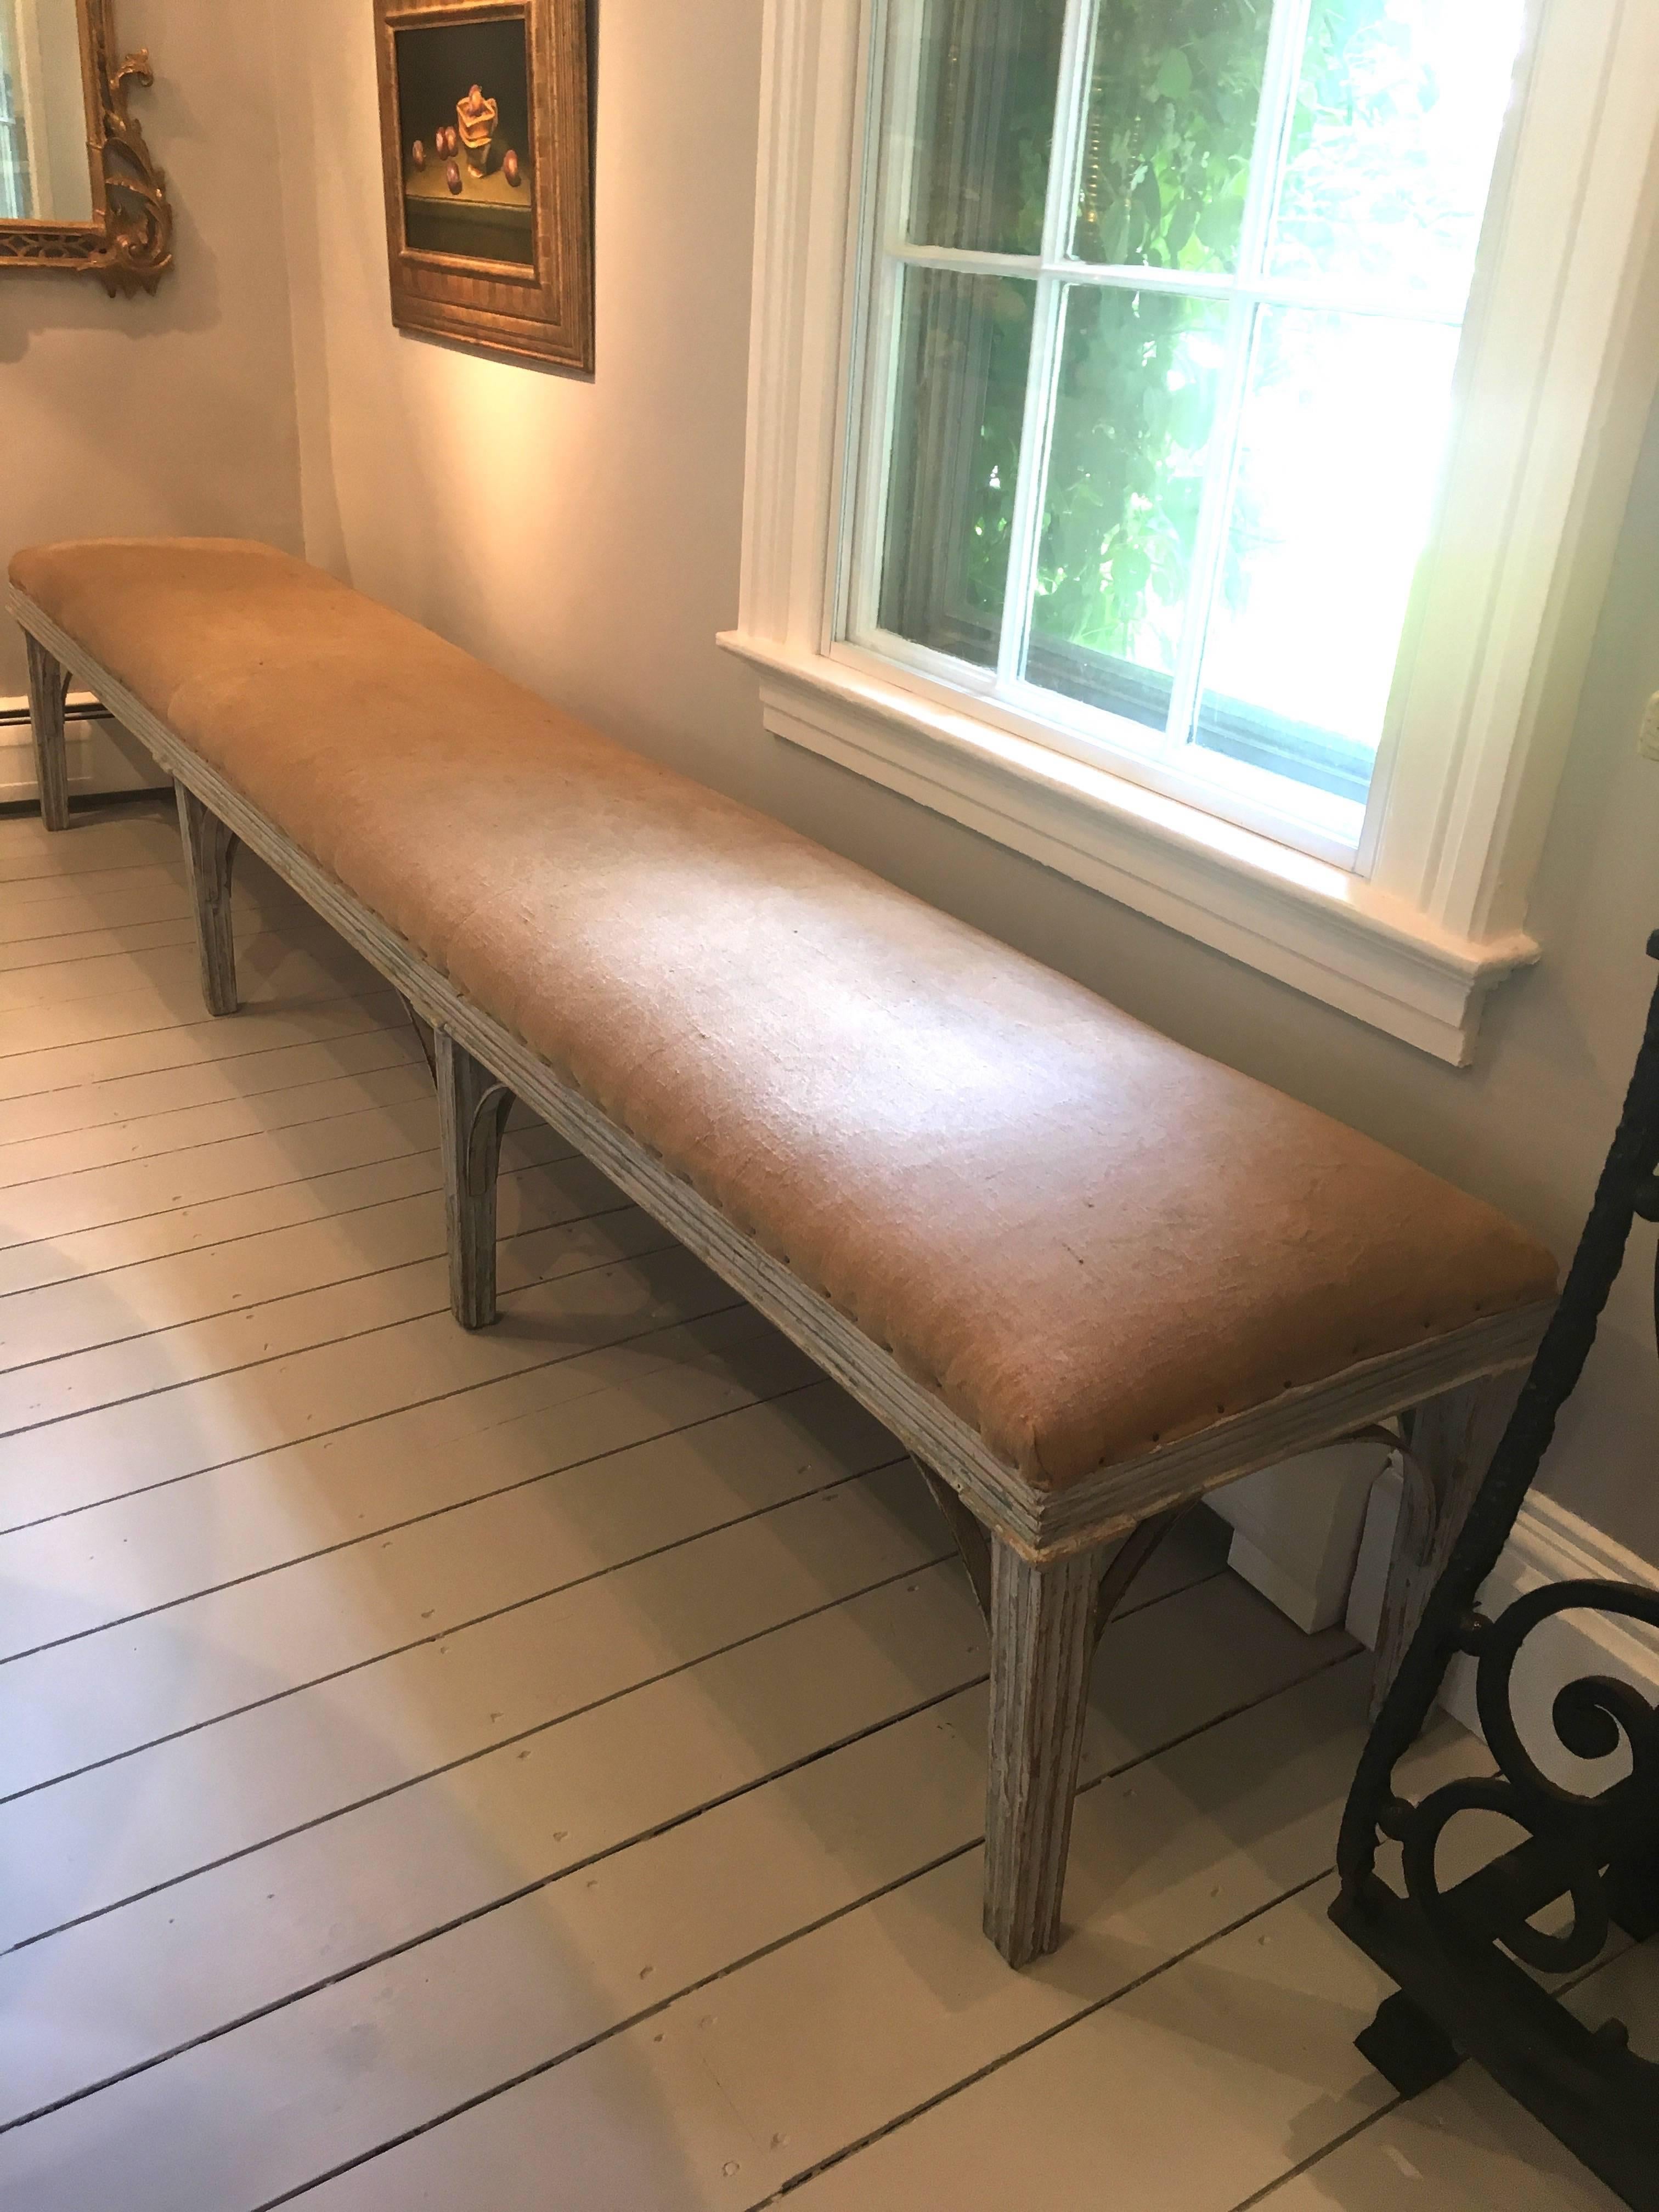 This bench is simply amazing! Crafted of pine with a reeded apron and eight reeded legs, it spans over 9 feet long and would make a superb addition to any long hallway, library or bedroom. Alternatively, it would be wonderful at a long dining table